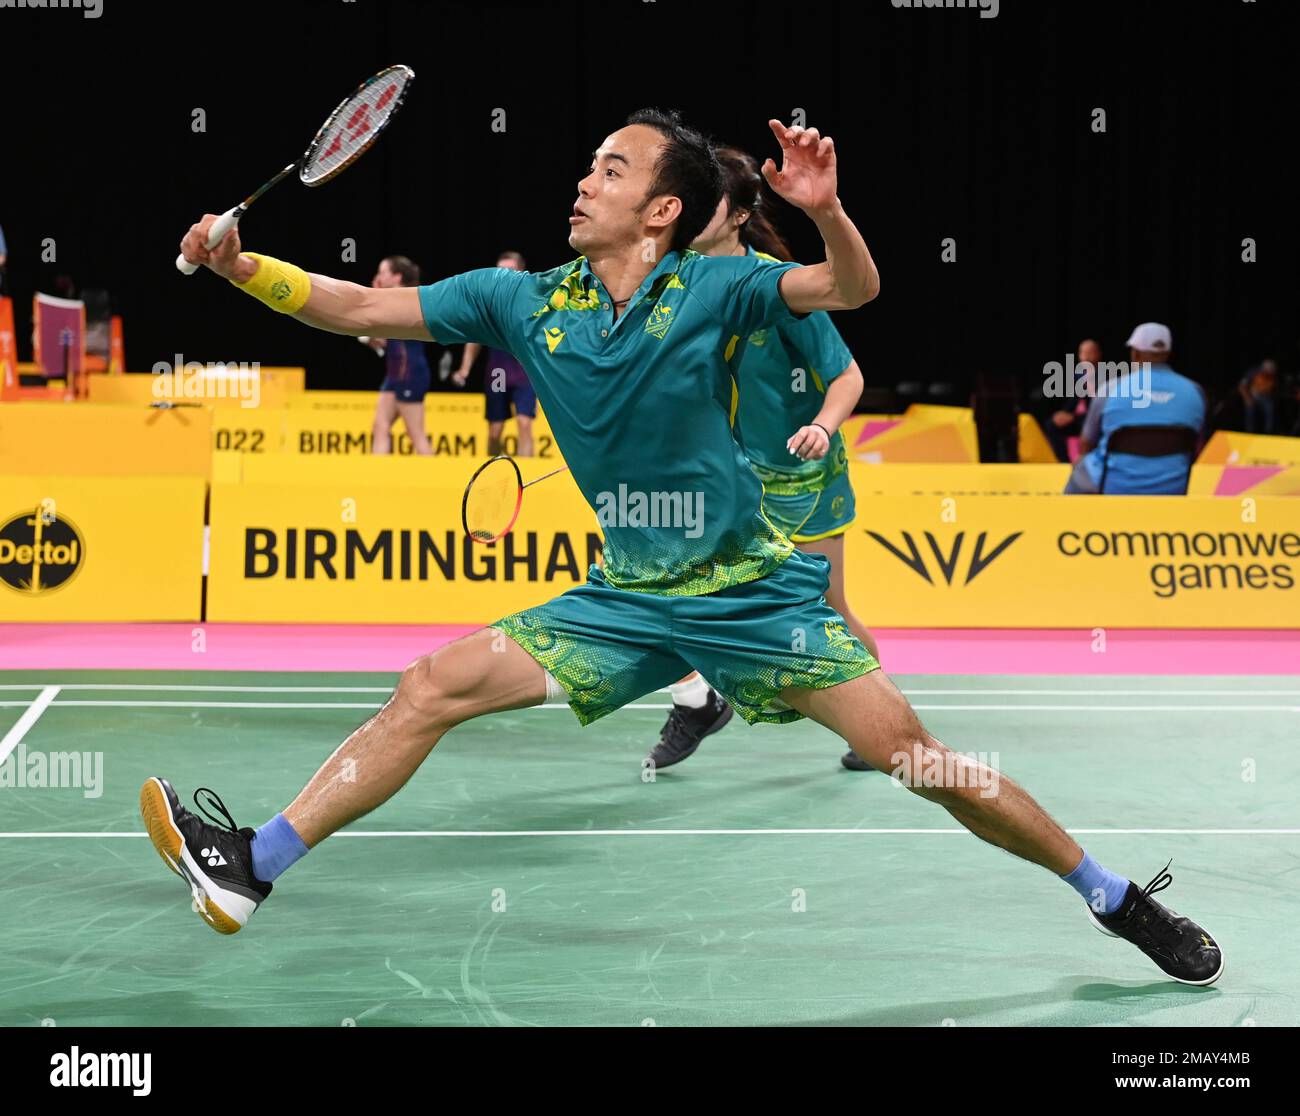 Australias Angela Yu and Tran Hoang Pham compete during the Badminton Mixed Doubles game against New Zealands Anona Pak and Oliver Leydon-Davis at the Commonwealth Games in Birmingham, England, Friday, Aug